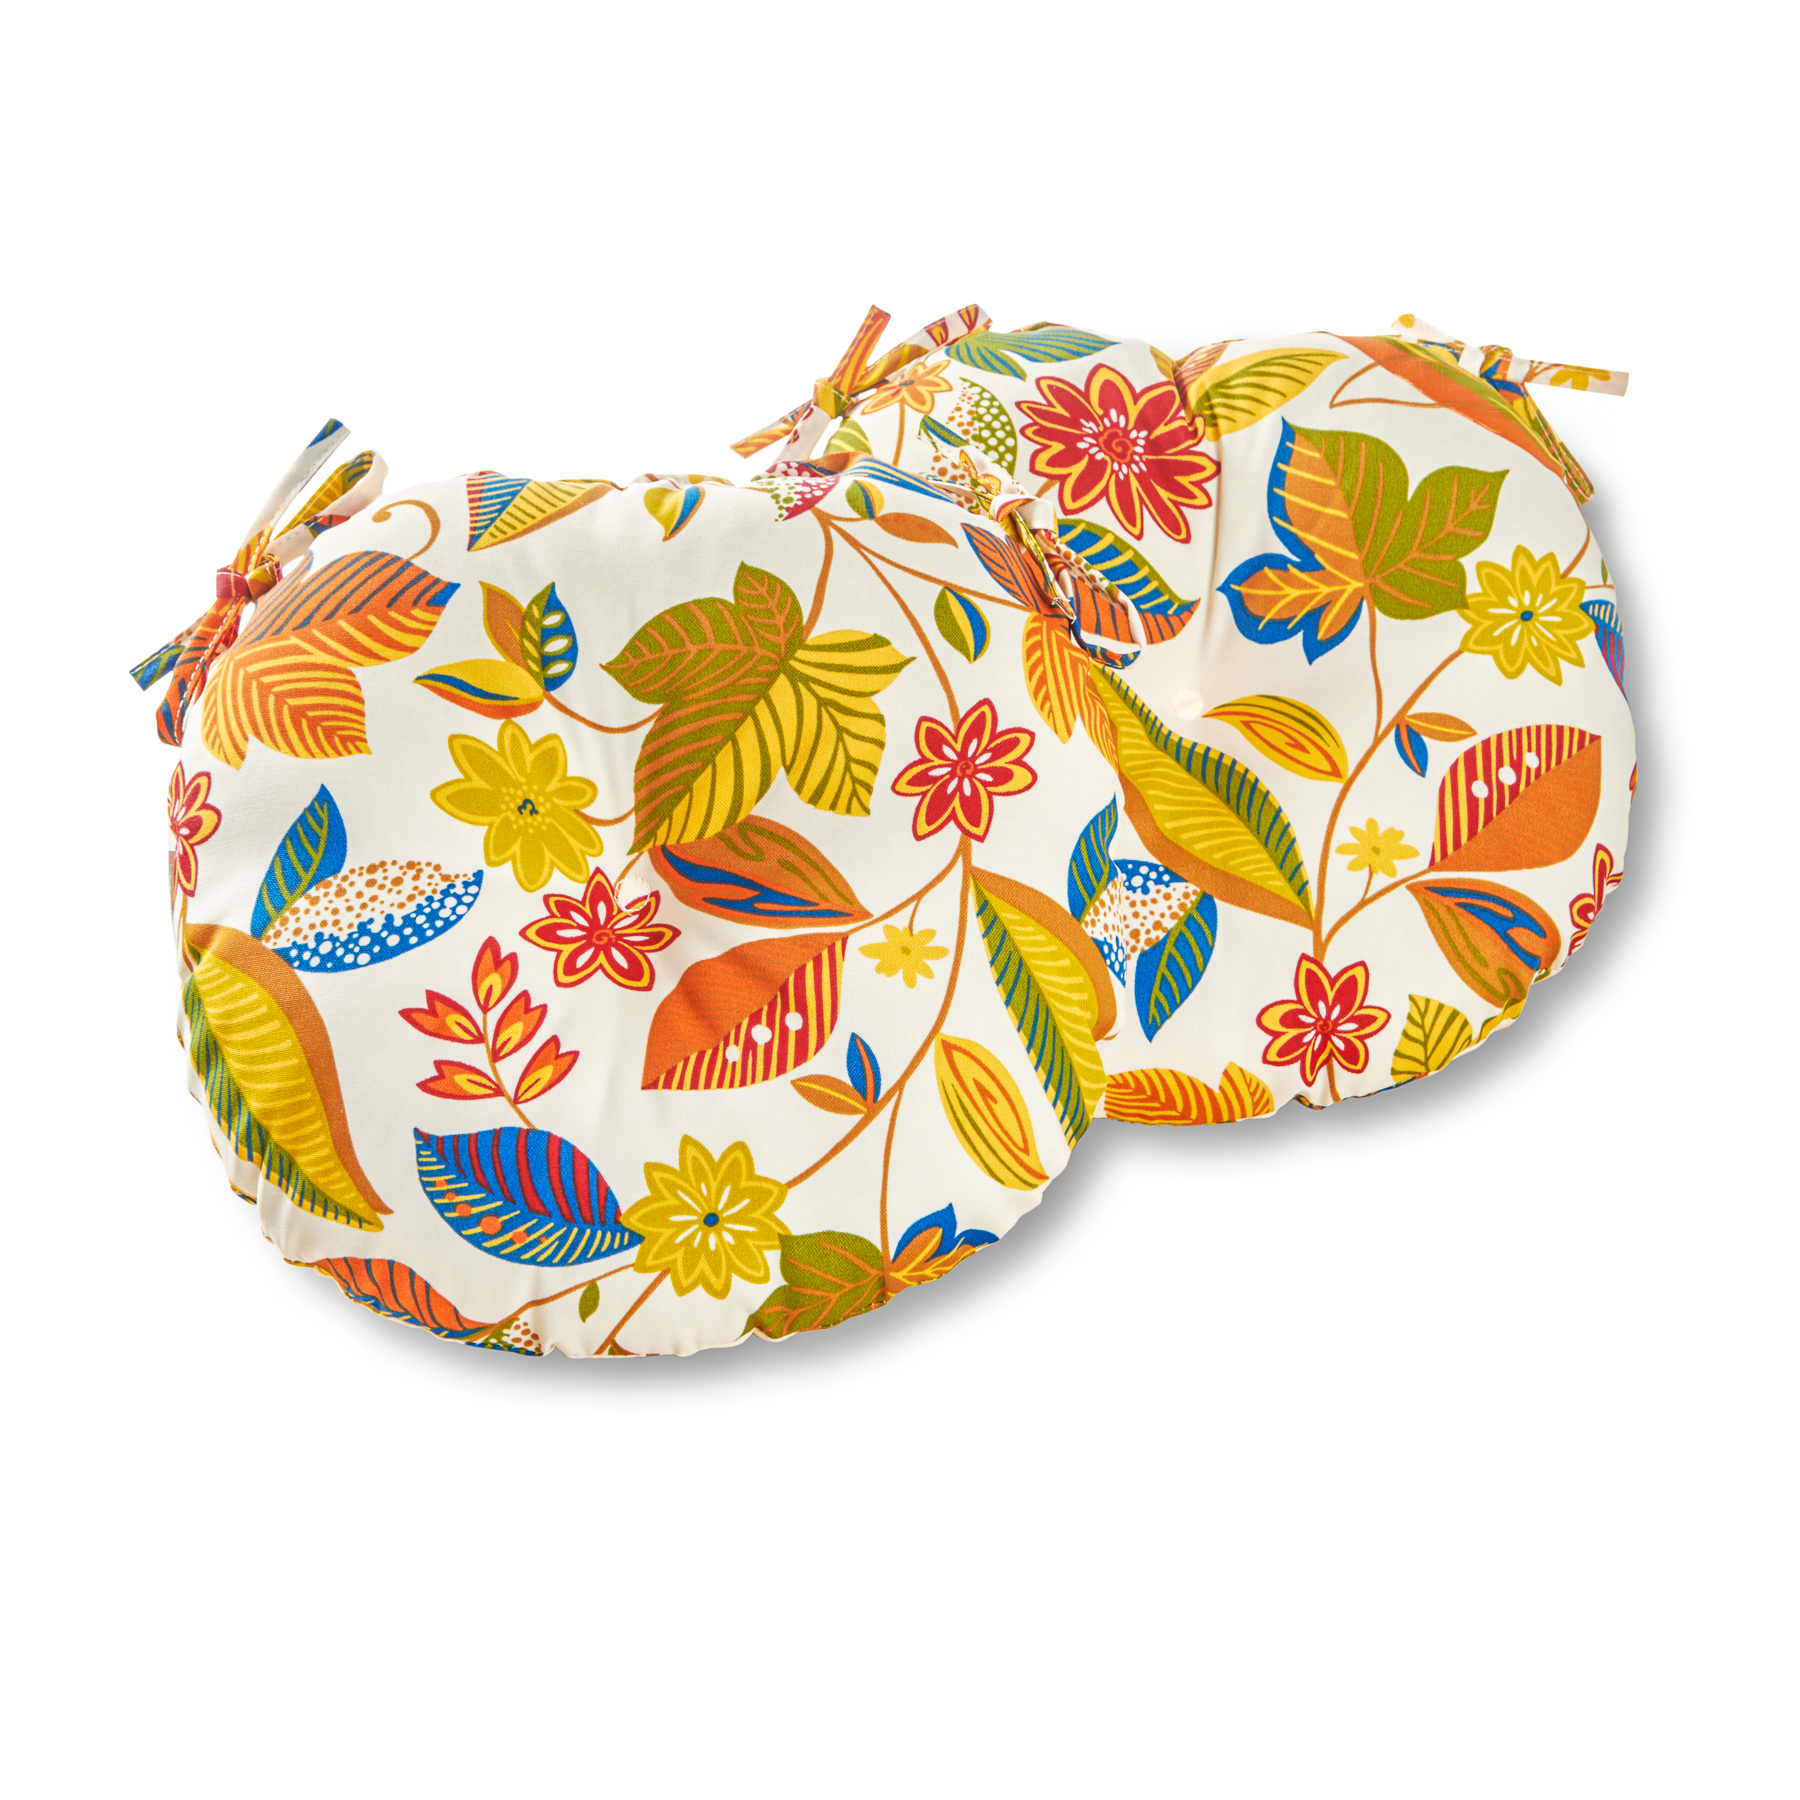 Greendale Home Fashions Esprit Floral 15 in. Round Outdoor Reversible Bistro Seat Cushion (Set of 2) - image 1 of 6